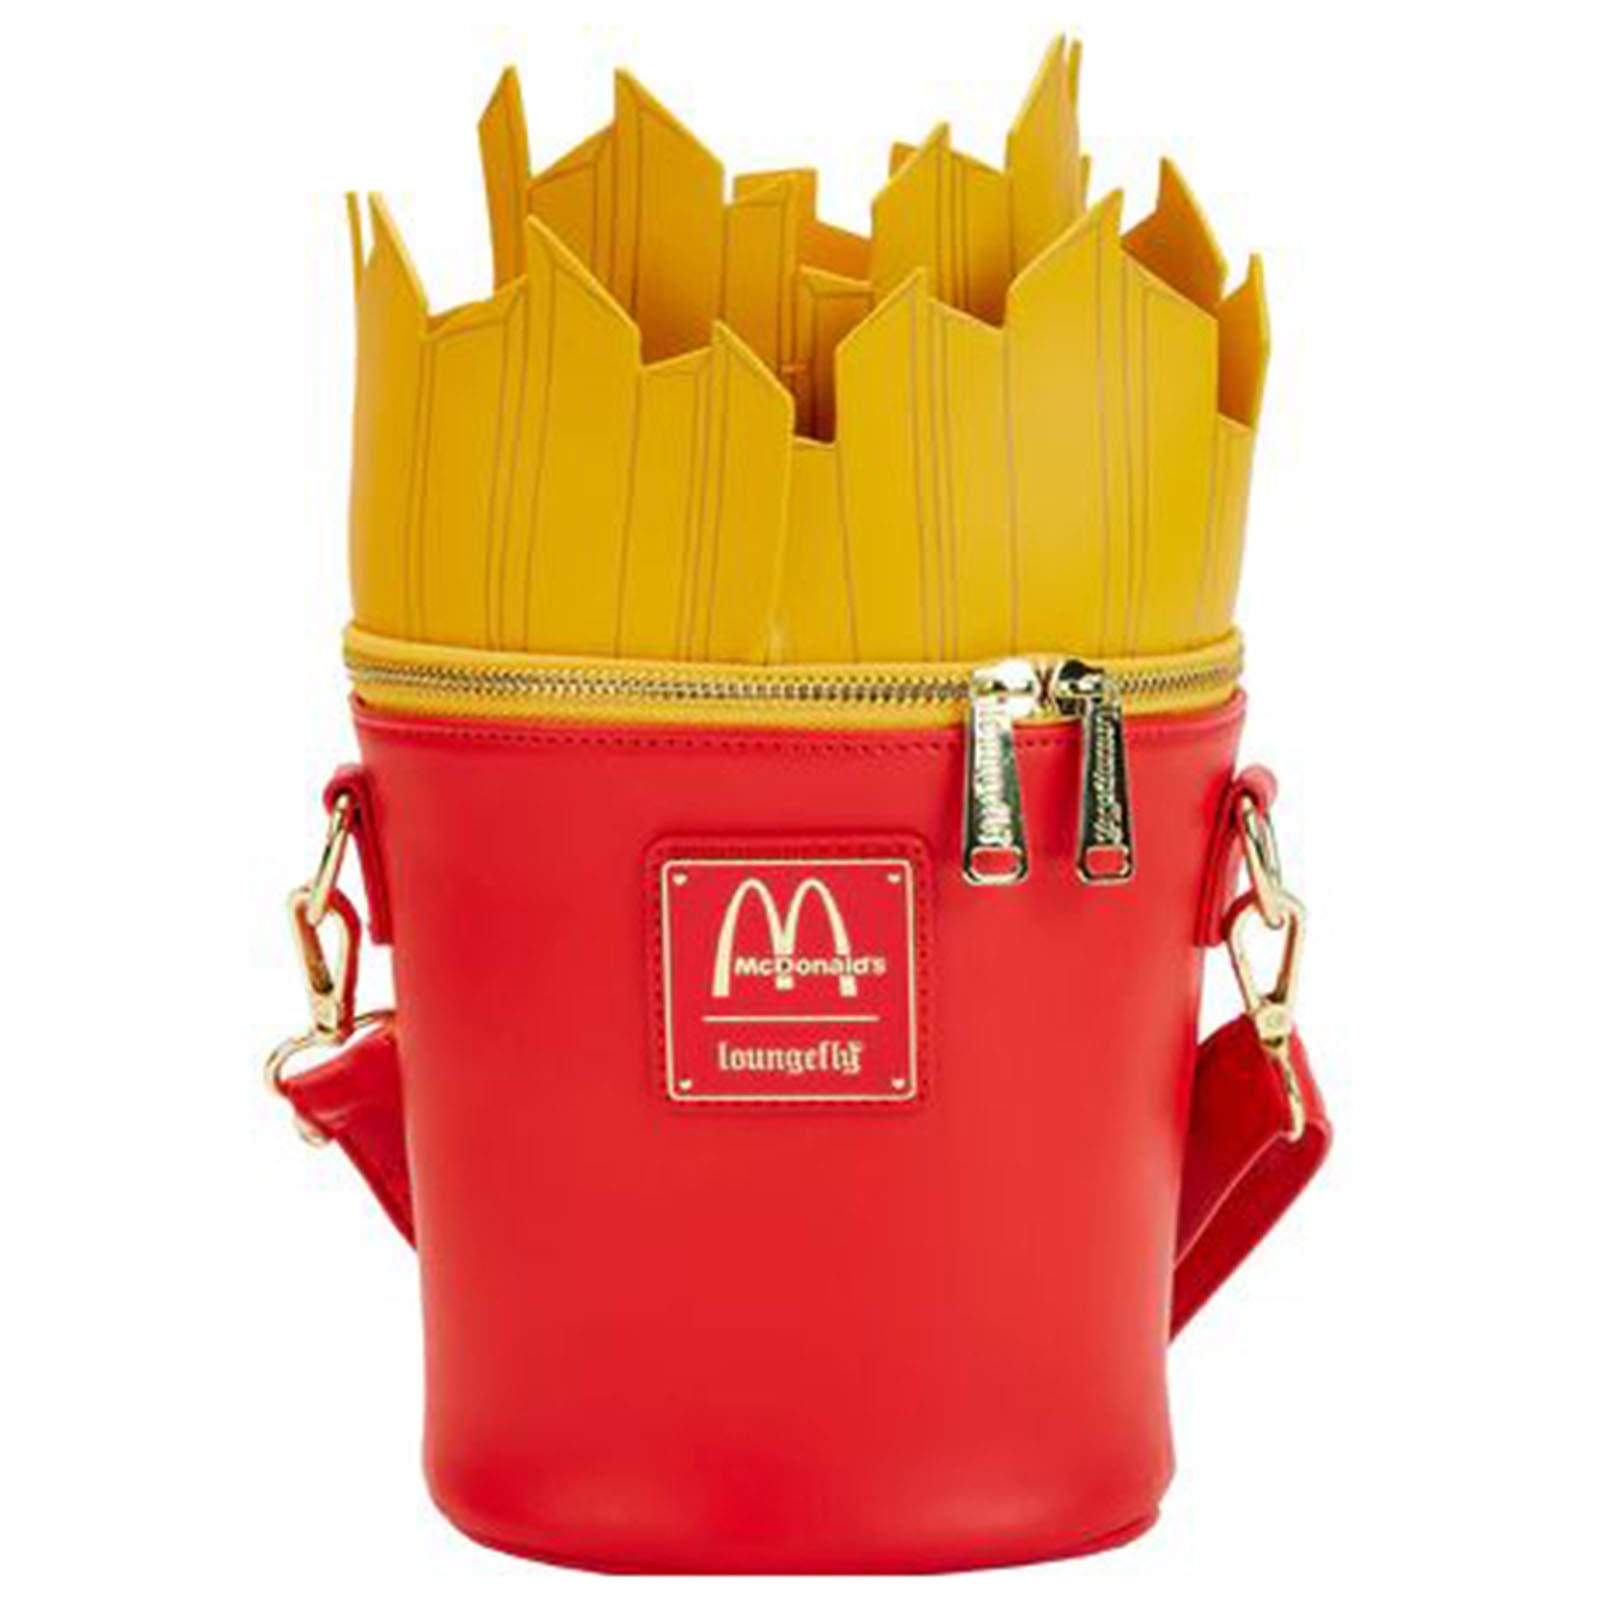 french fries purse